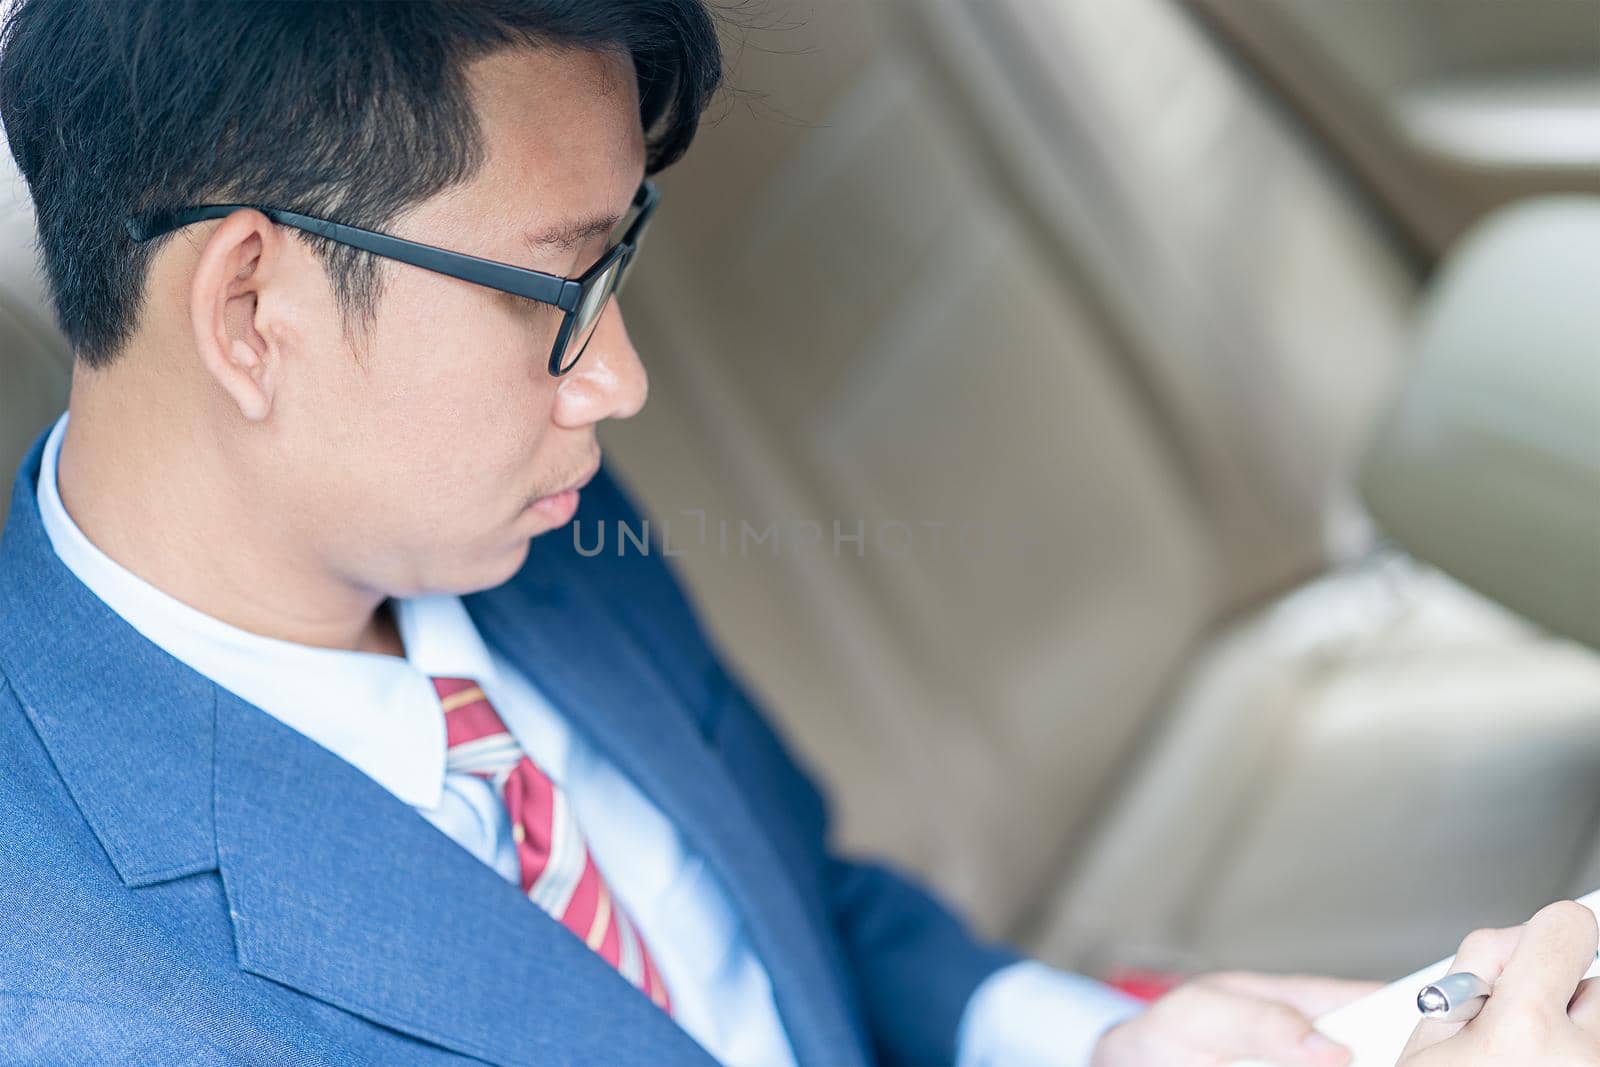 Businessman working in the backseat of a car  by stoonn